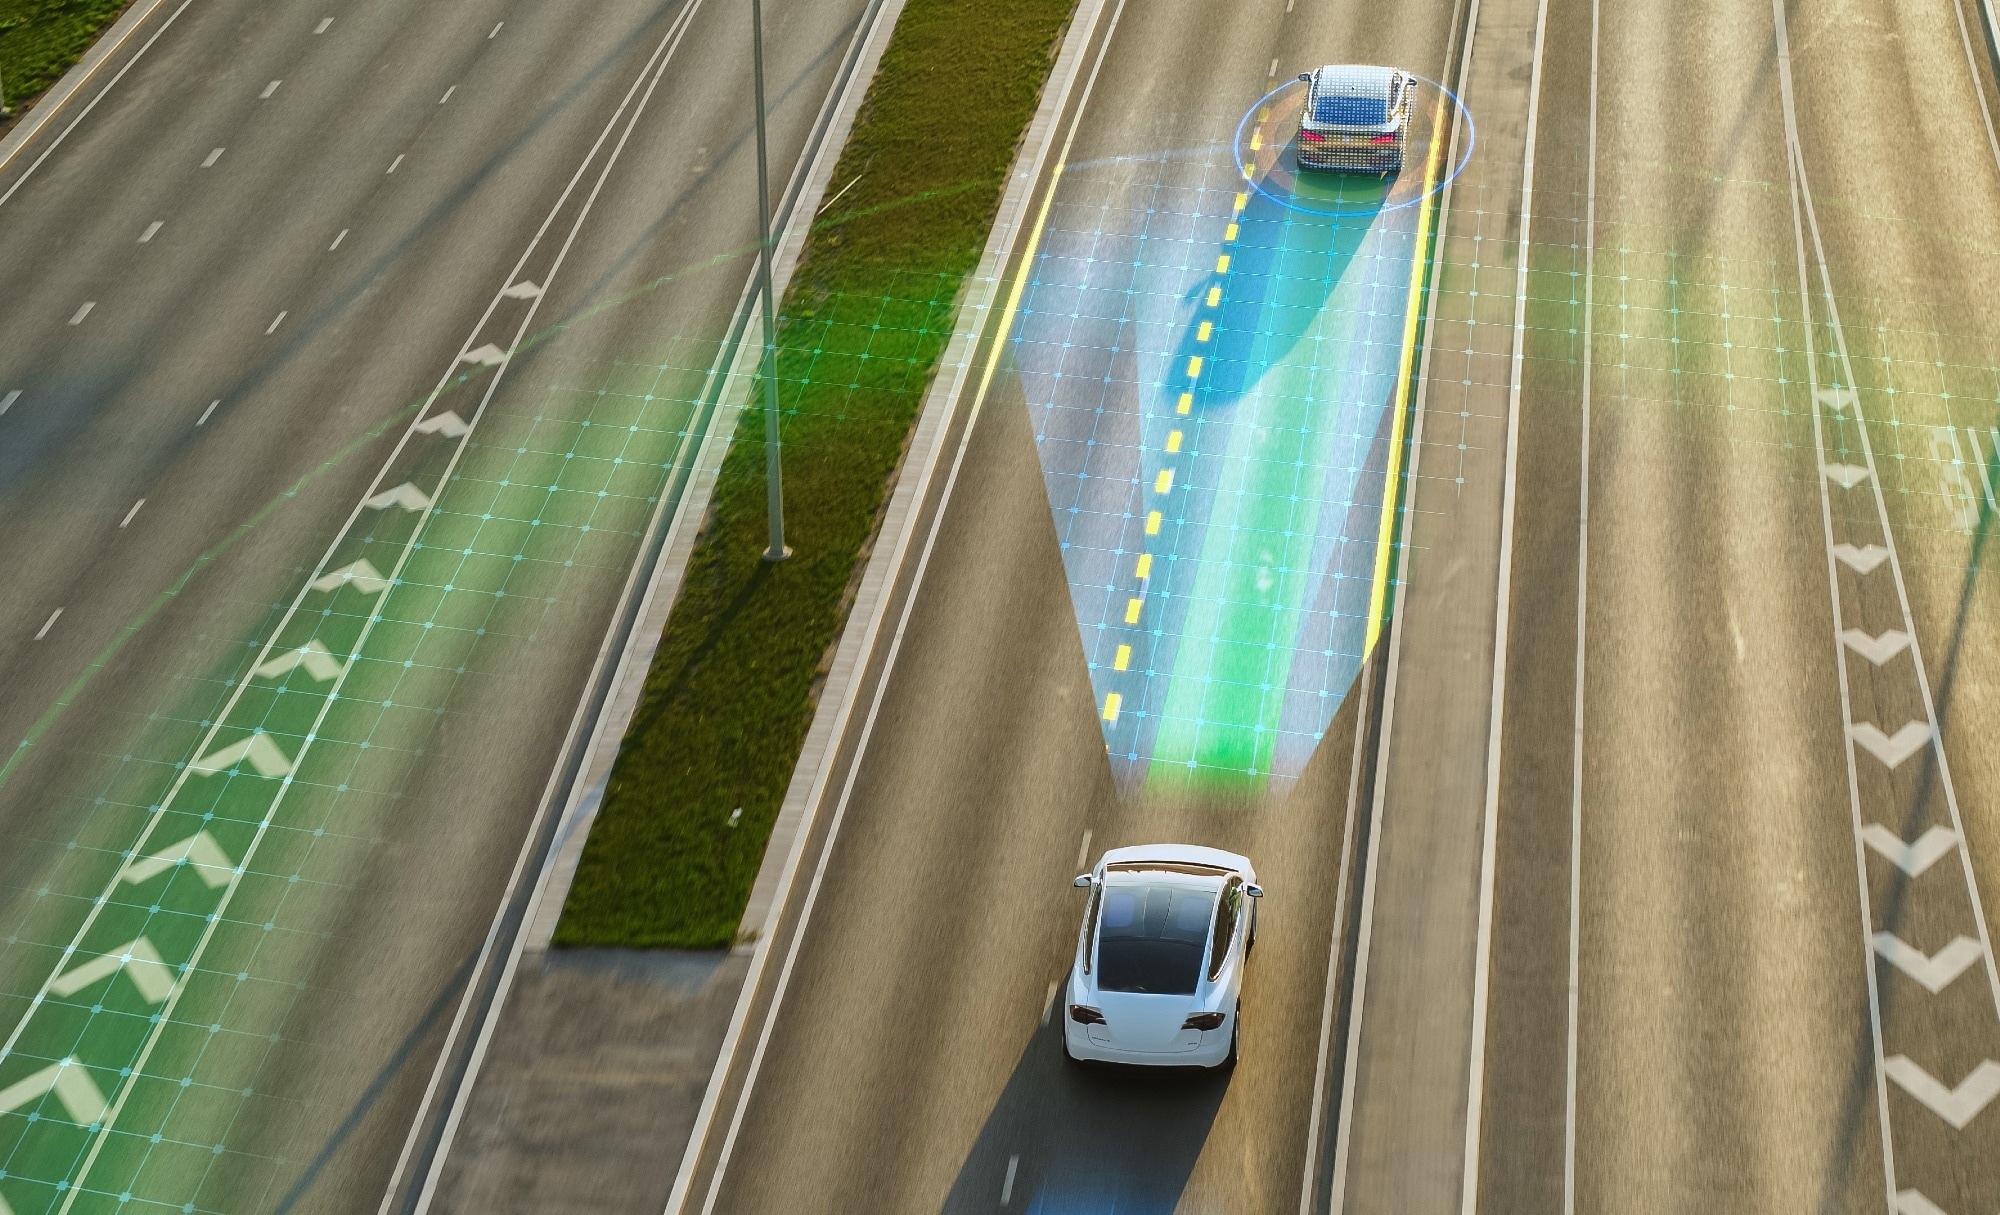 Study: FollowNet: A Unified Benchmark for Advancing Car-Following Behavior Modeling. Image credit: Gorodenkoff/Shutterstock